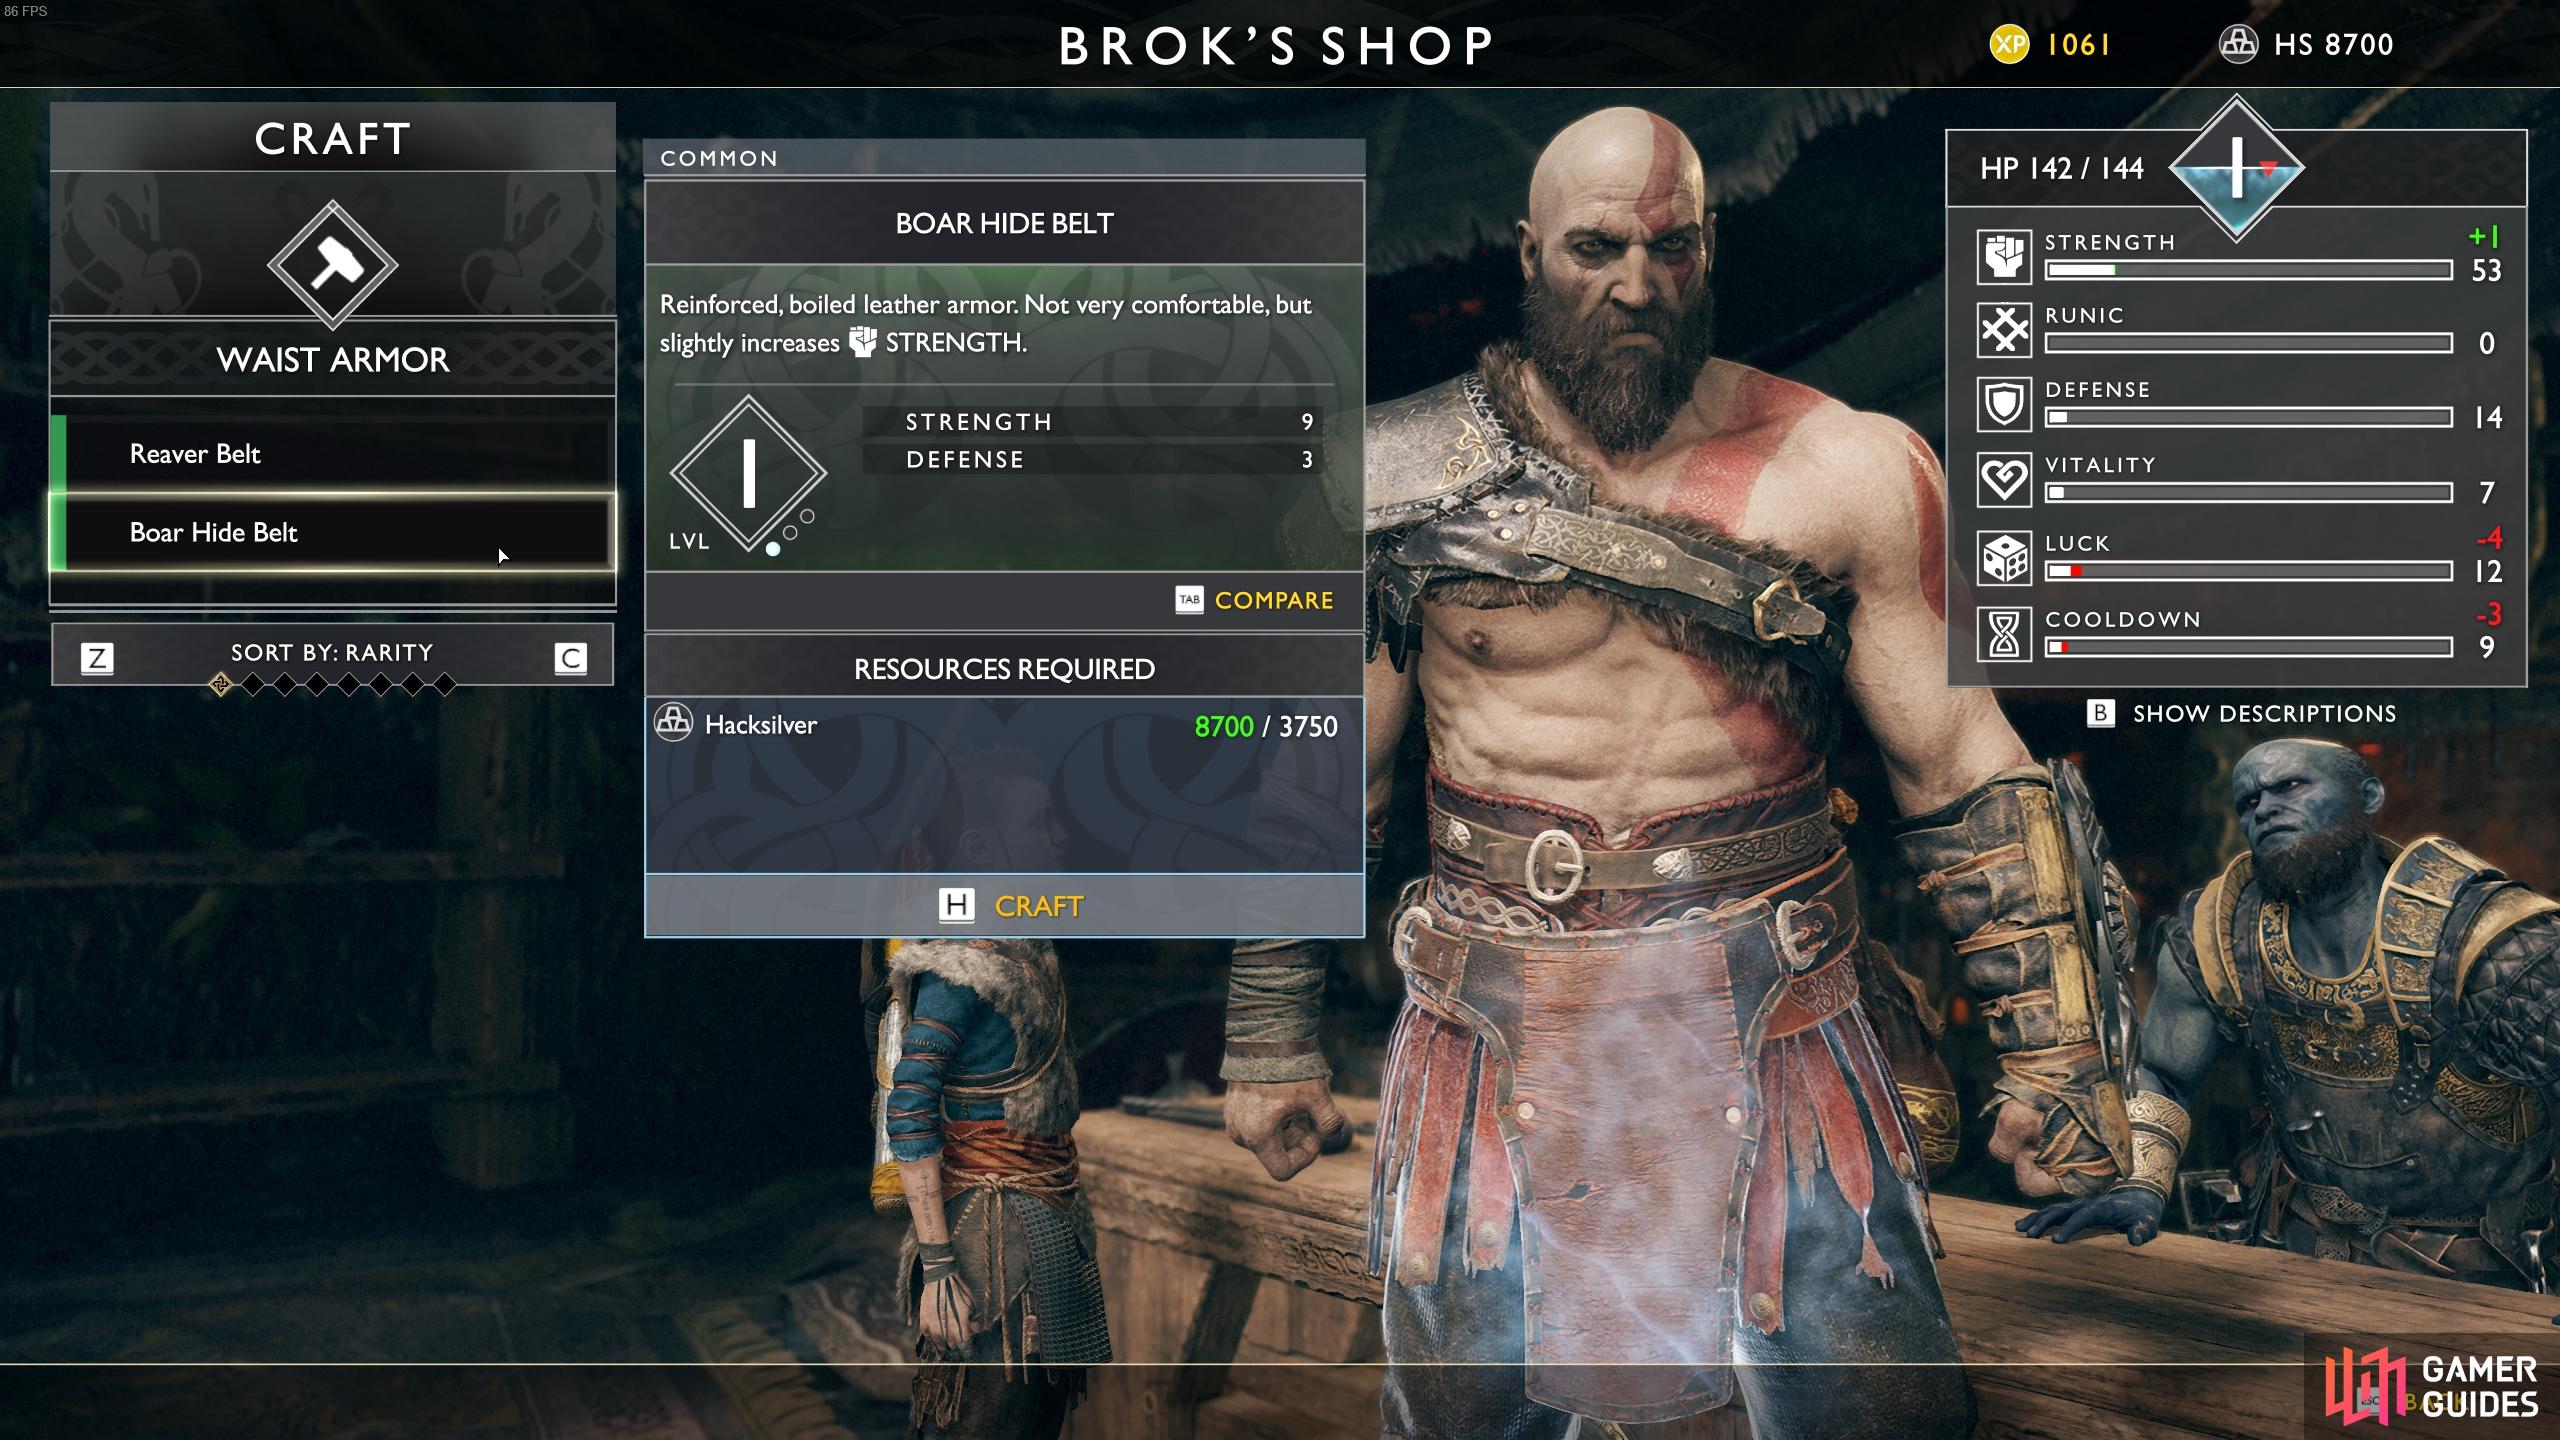 Try to upgrade Kratos' gear and skills as much as possible before you begin exploring.